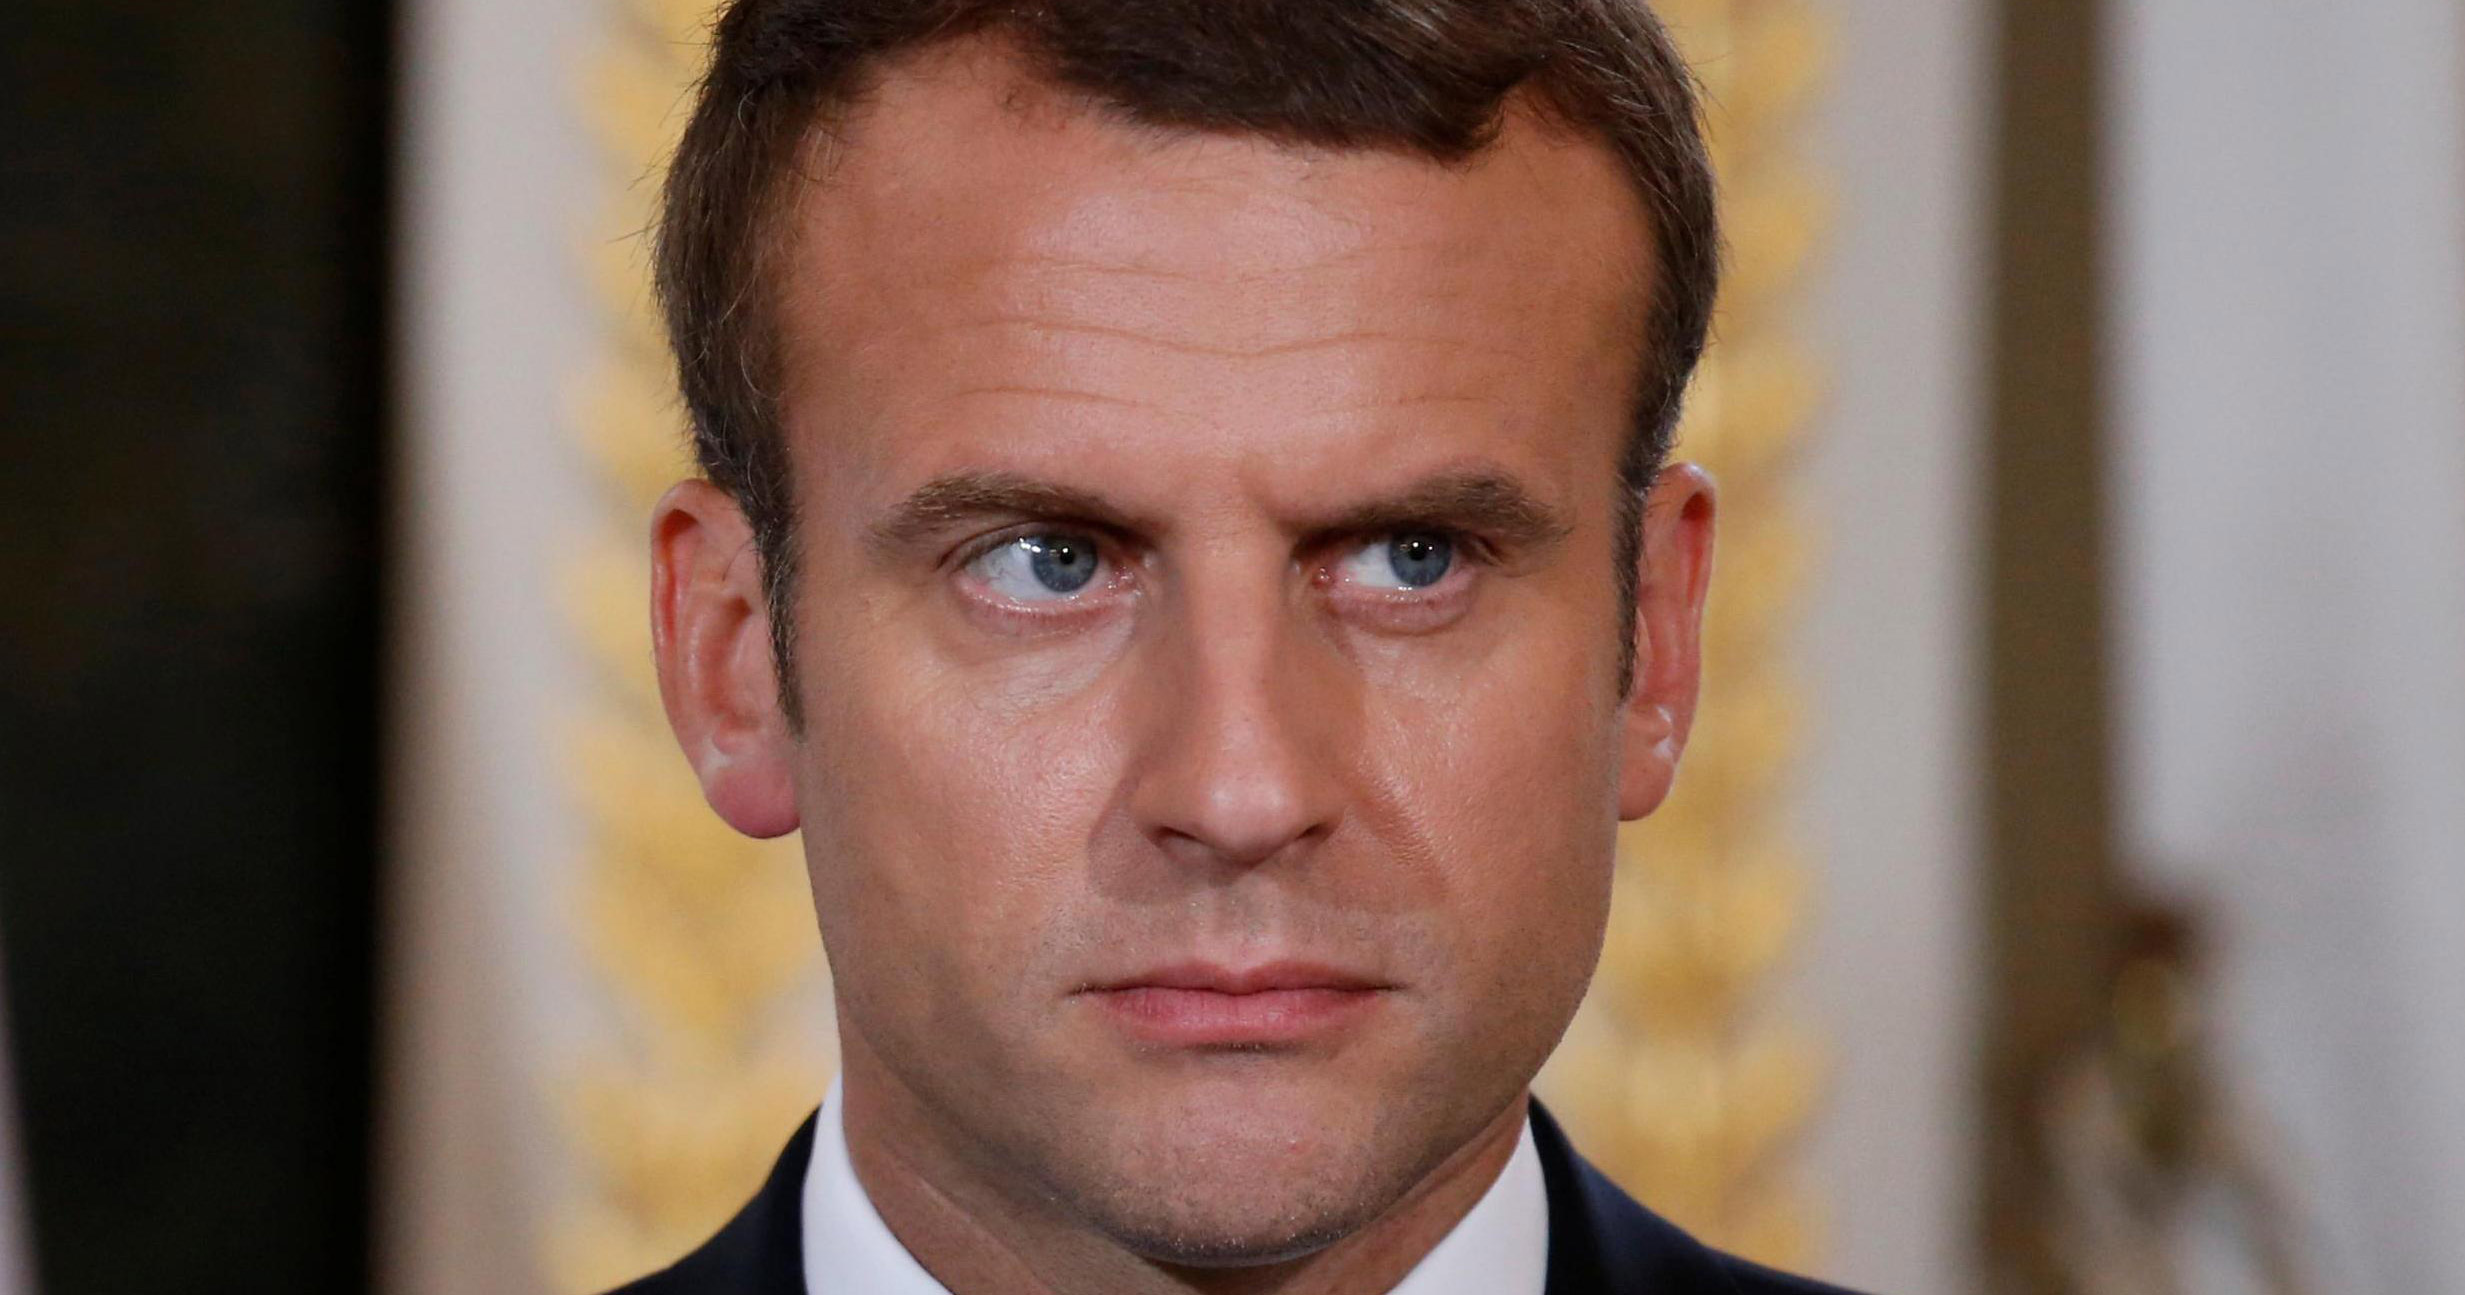 French President Emmanuel Marcon responds attack on gay man